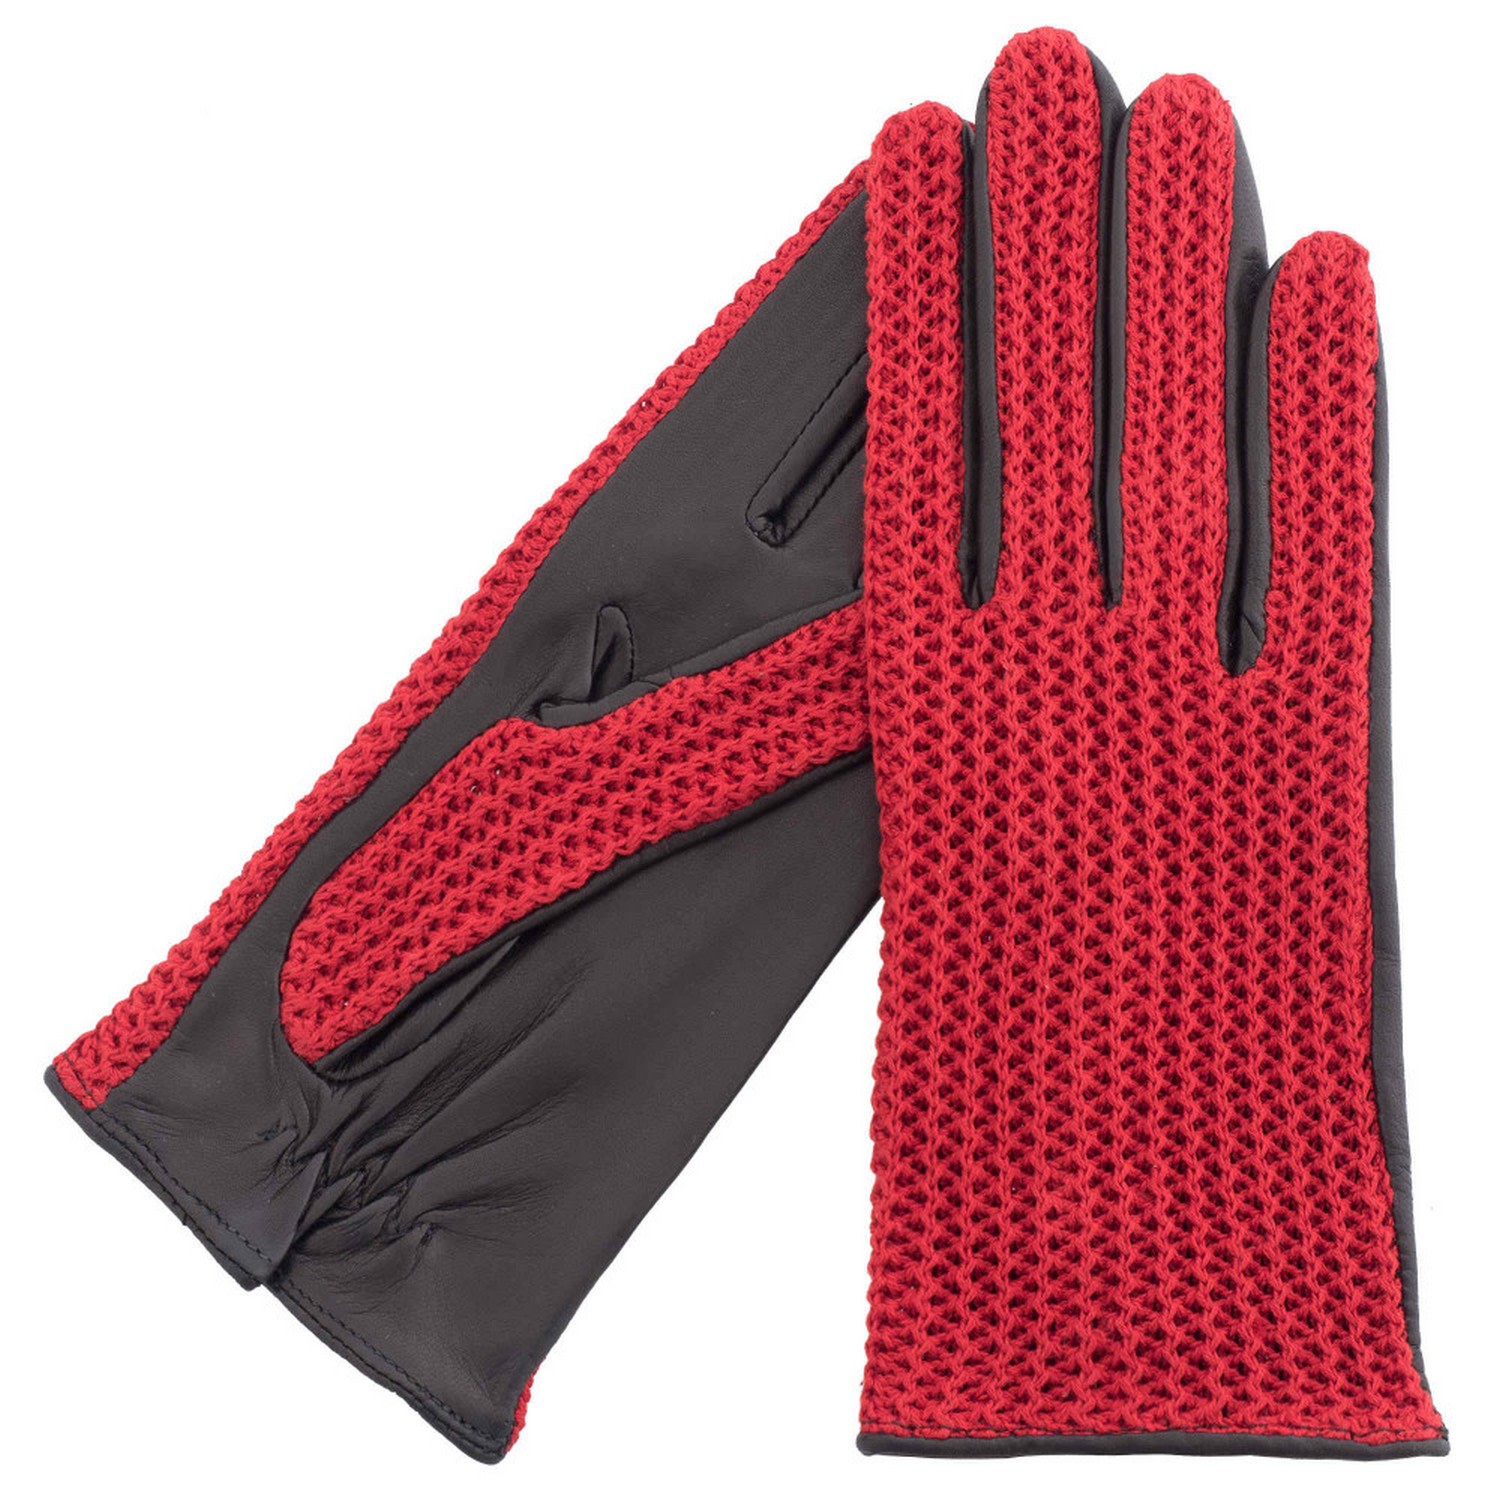 Olivia / Women Leather Gloves - Red 8.5" Karma Leather Gloves